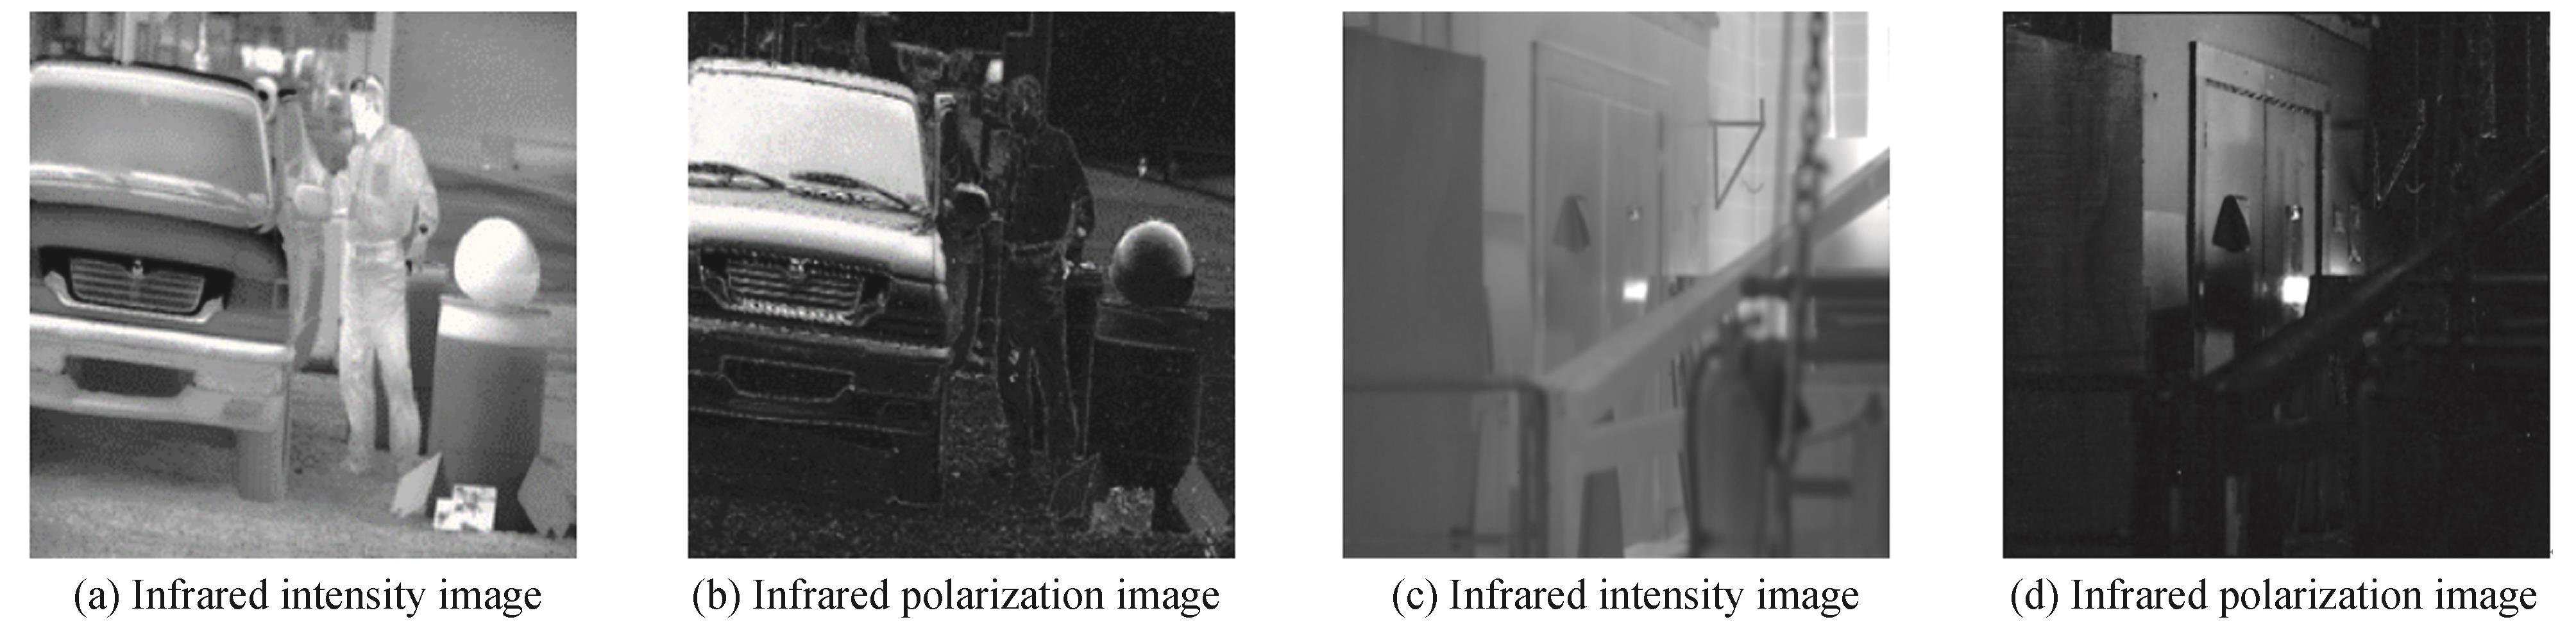 Source dual-mode infrared images of two groups